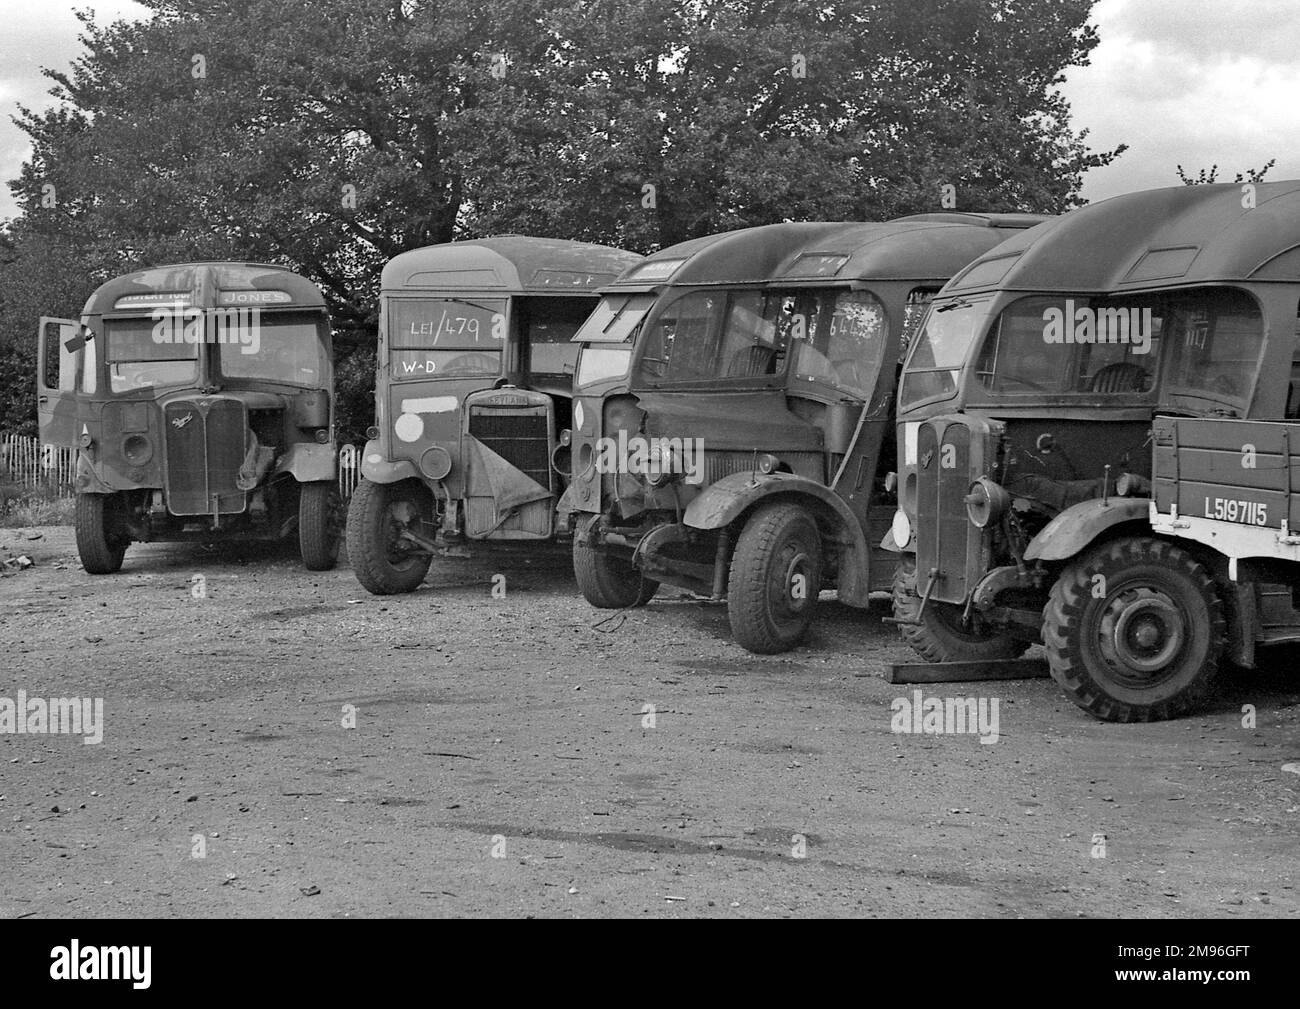 Vehicles in a yard, waiting to be repaired, or perhaps they are beyond repair and are being held for spare parts. Stock Photo